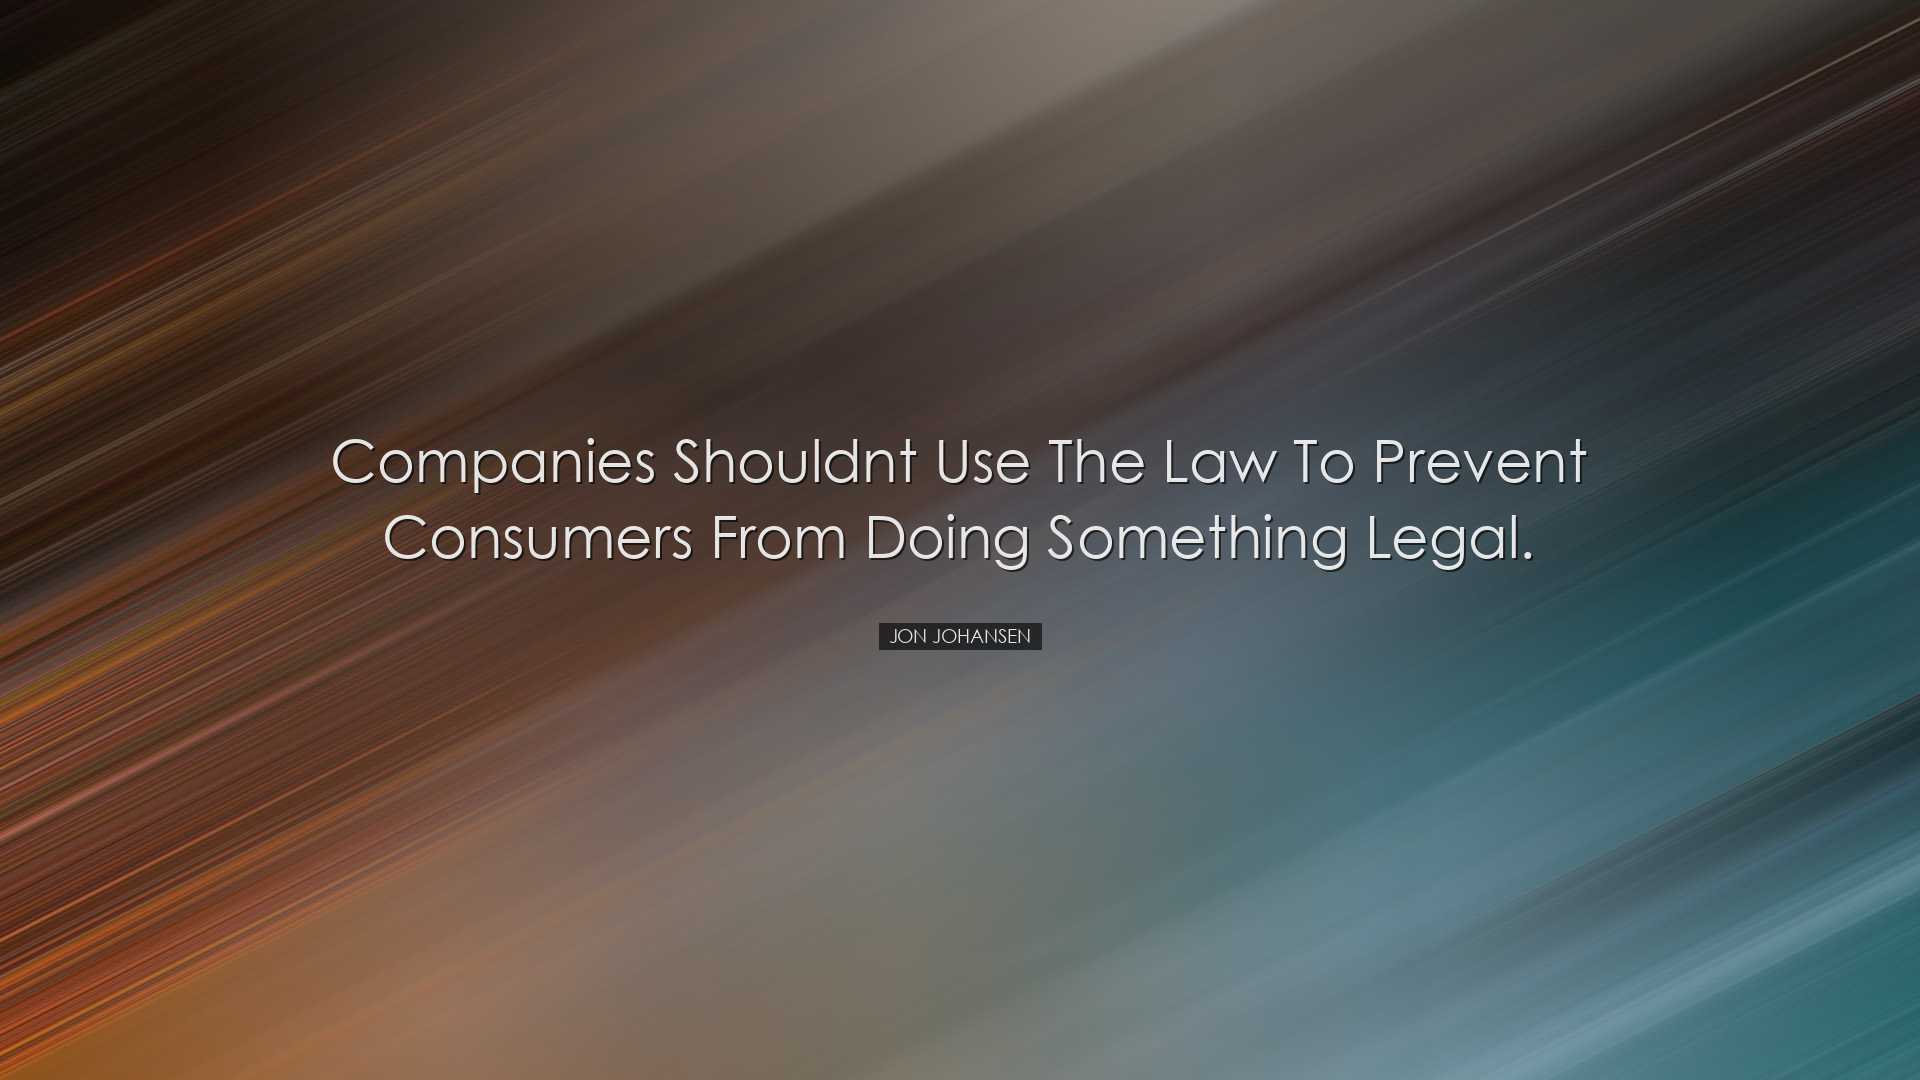 Companies shouldnt use the law to prevent consumers from doing som